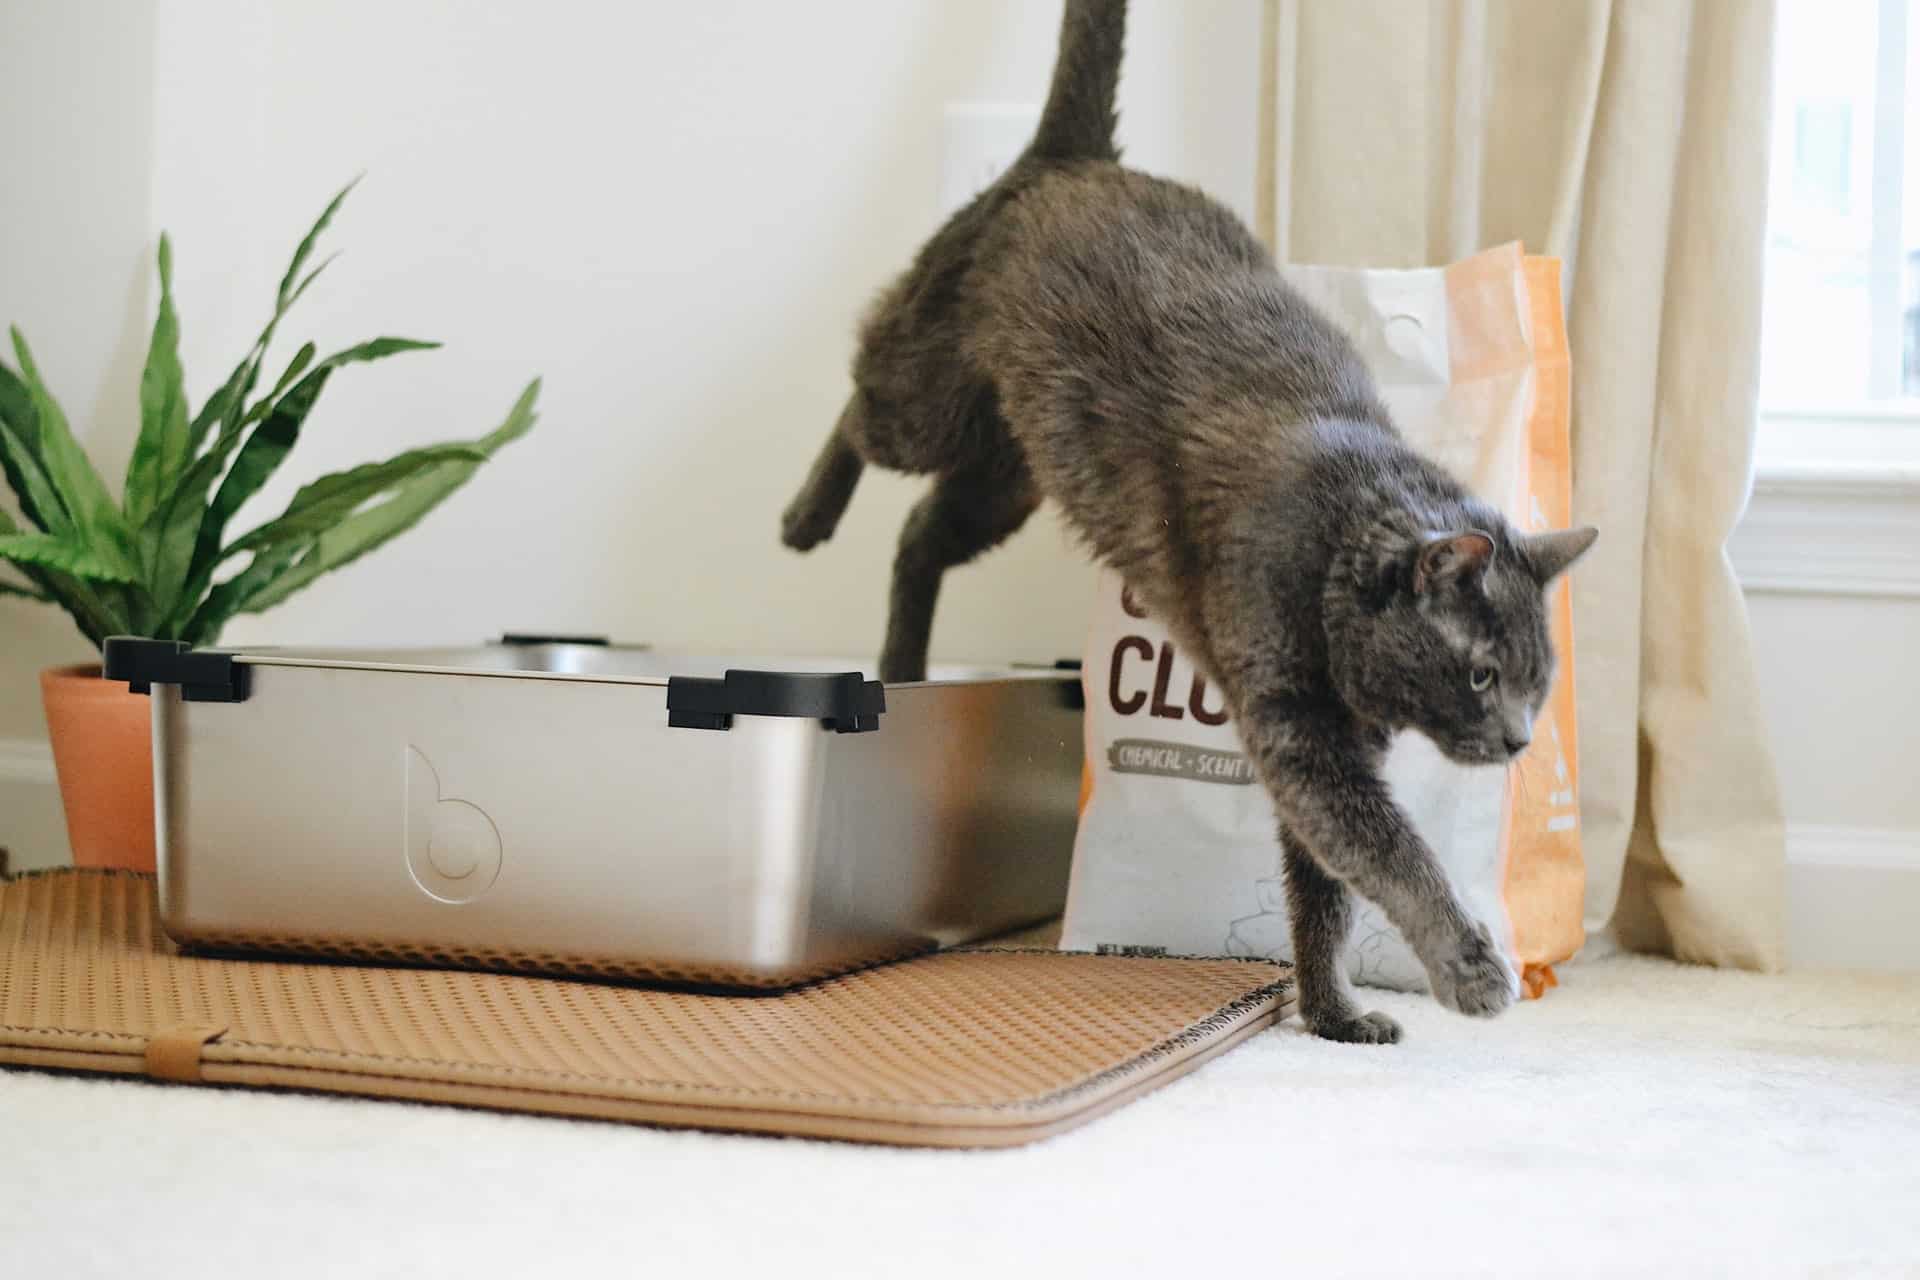 Cat litter box – what should I consider when choosing one?